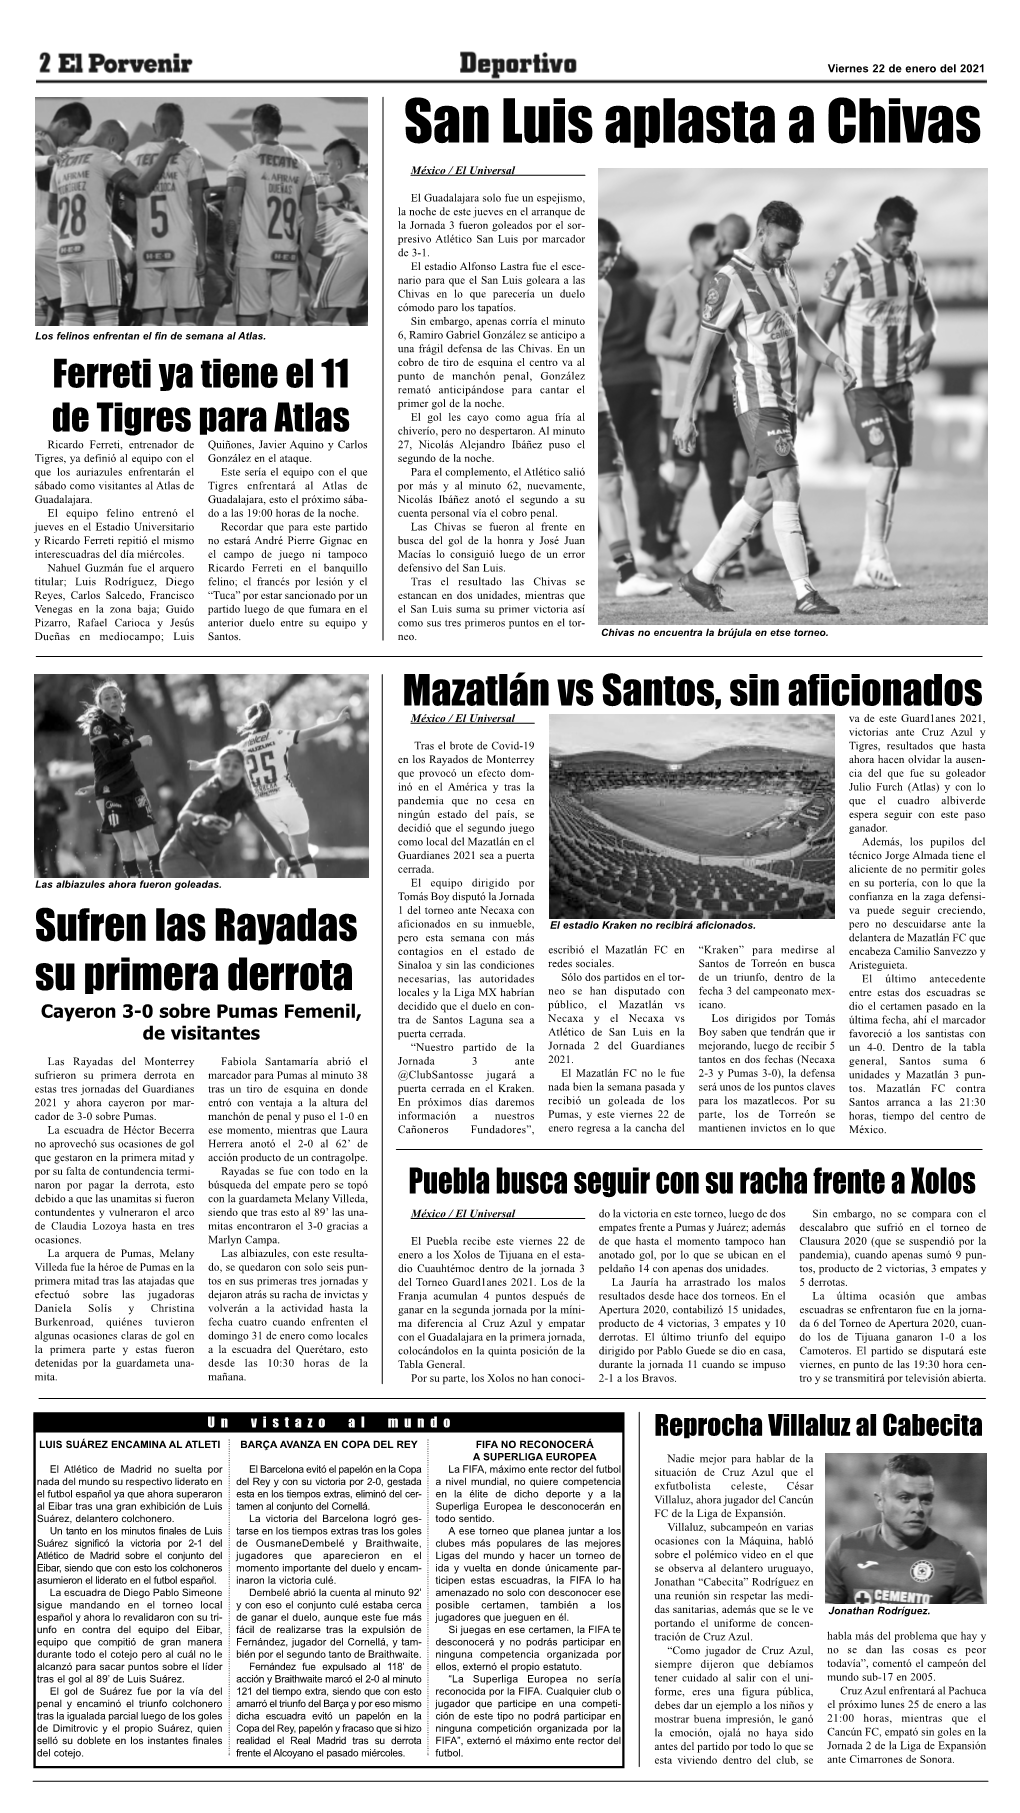 25 02 2014 16 Deportes4.Qxd (Page 1)